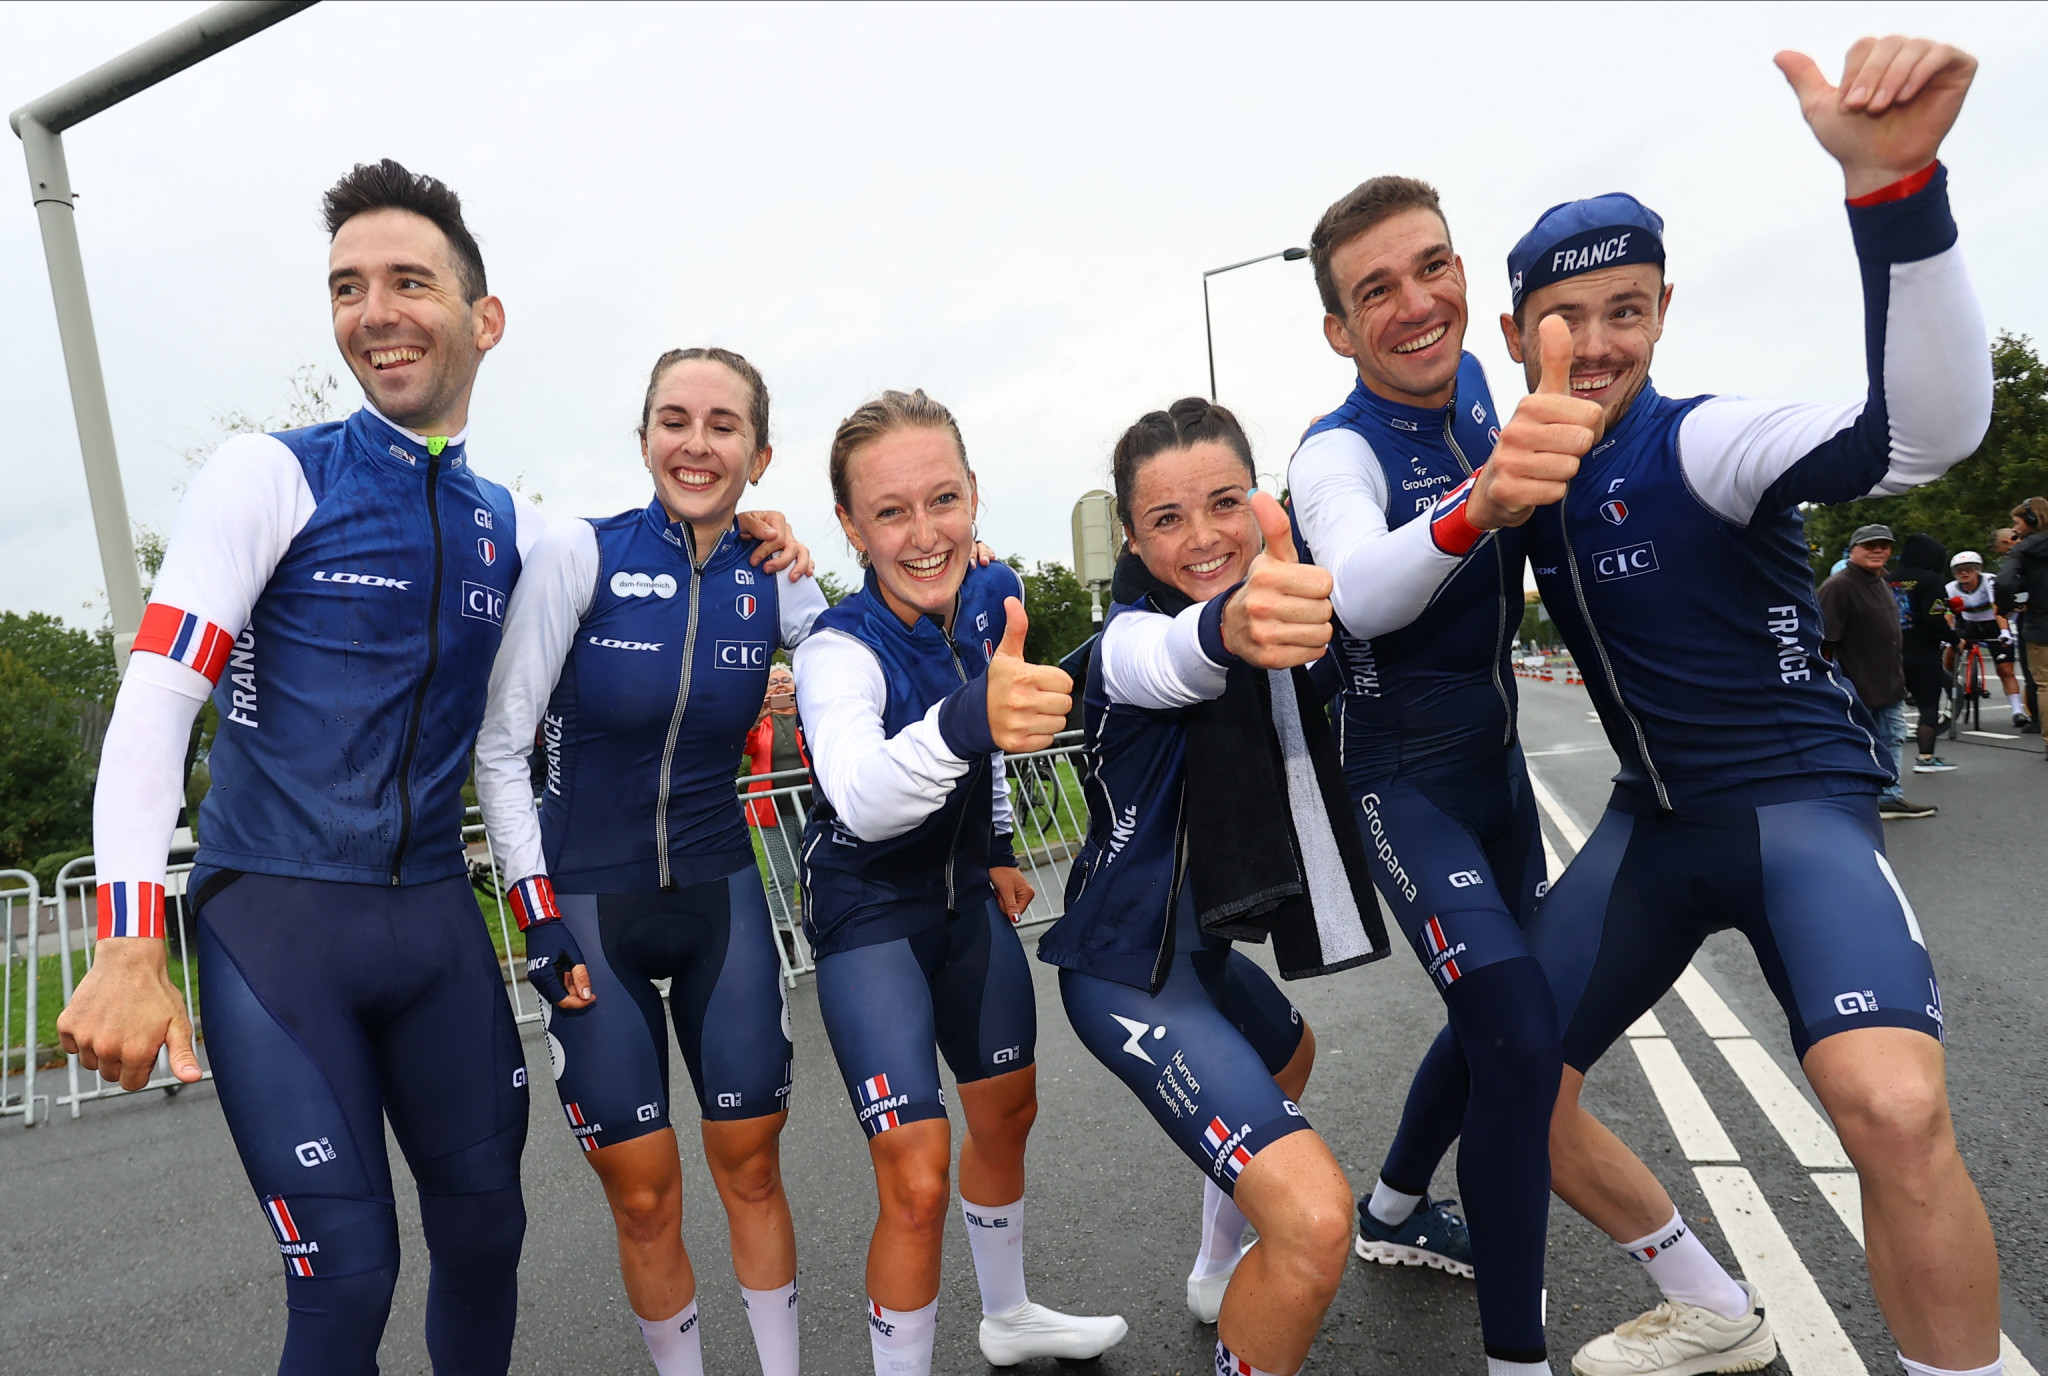 France won the mixed team relay at the UEC Road European Championships ©Getty Images